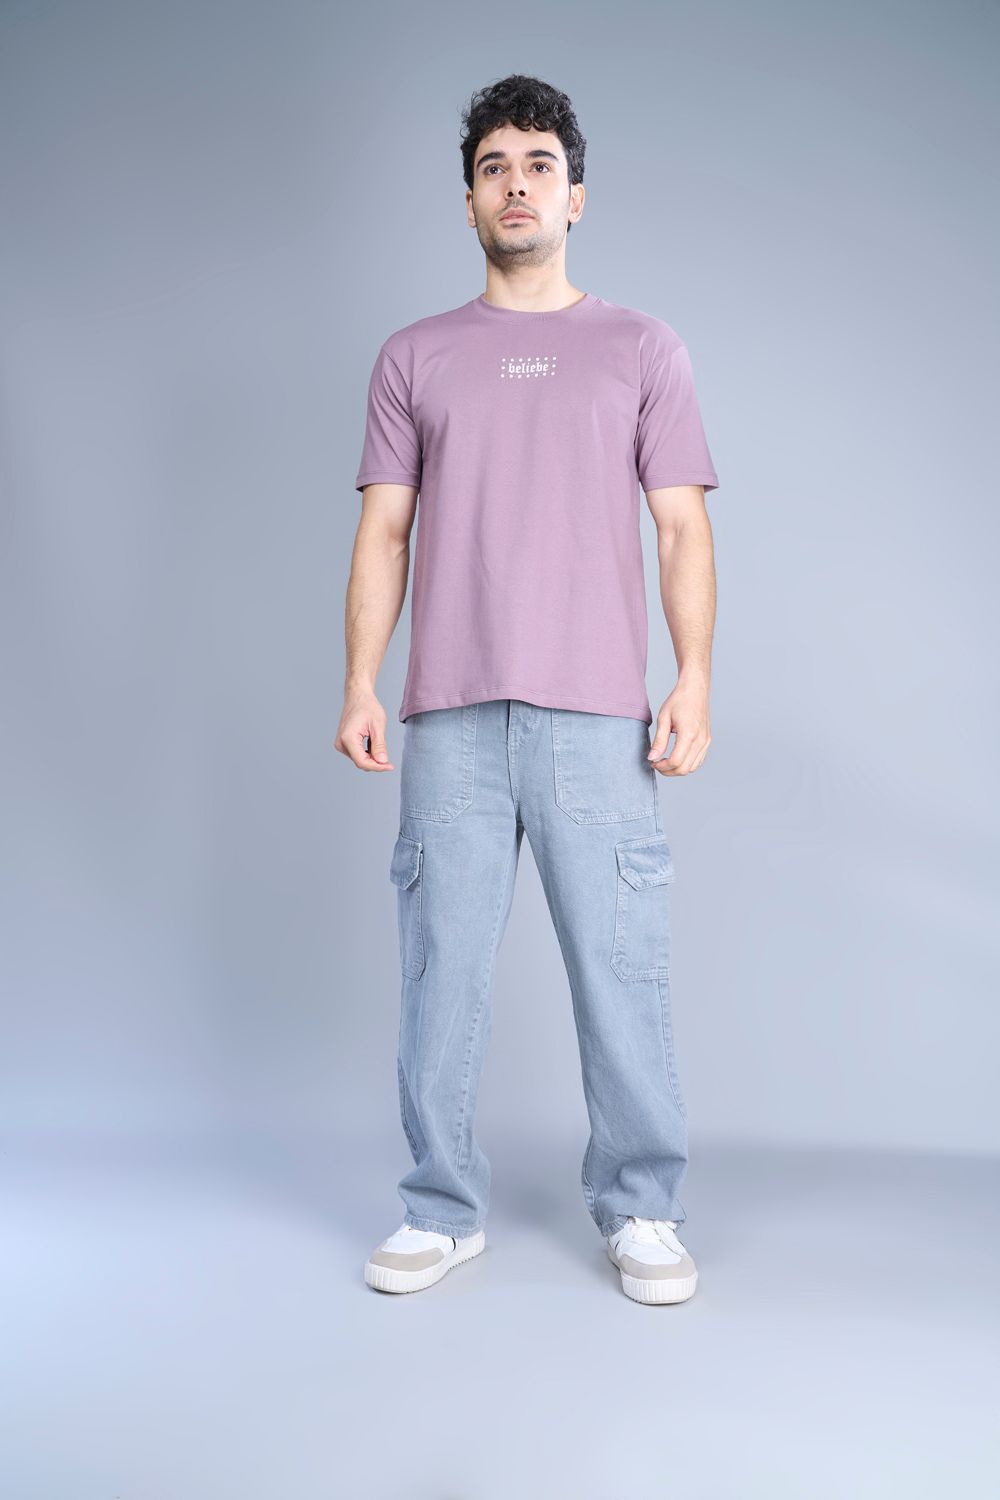 Cotton oversized T shirt for men in the solid color Opera Mauve with half sleeves and crew neck, front view.